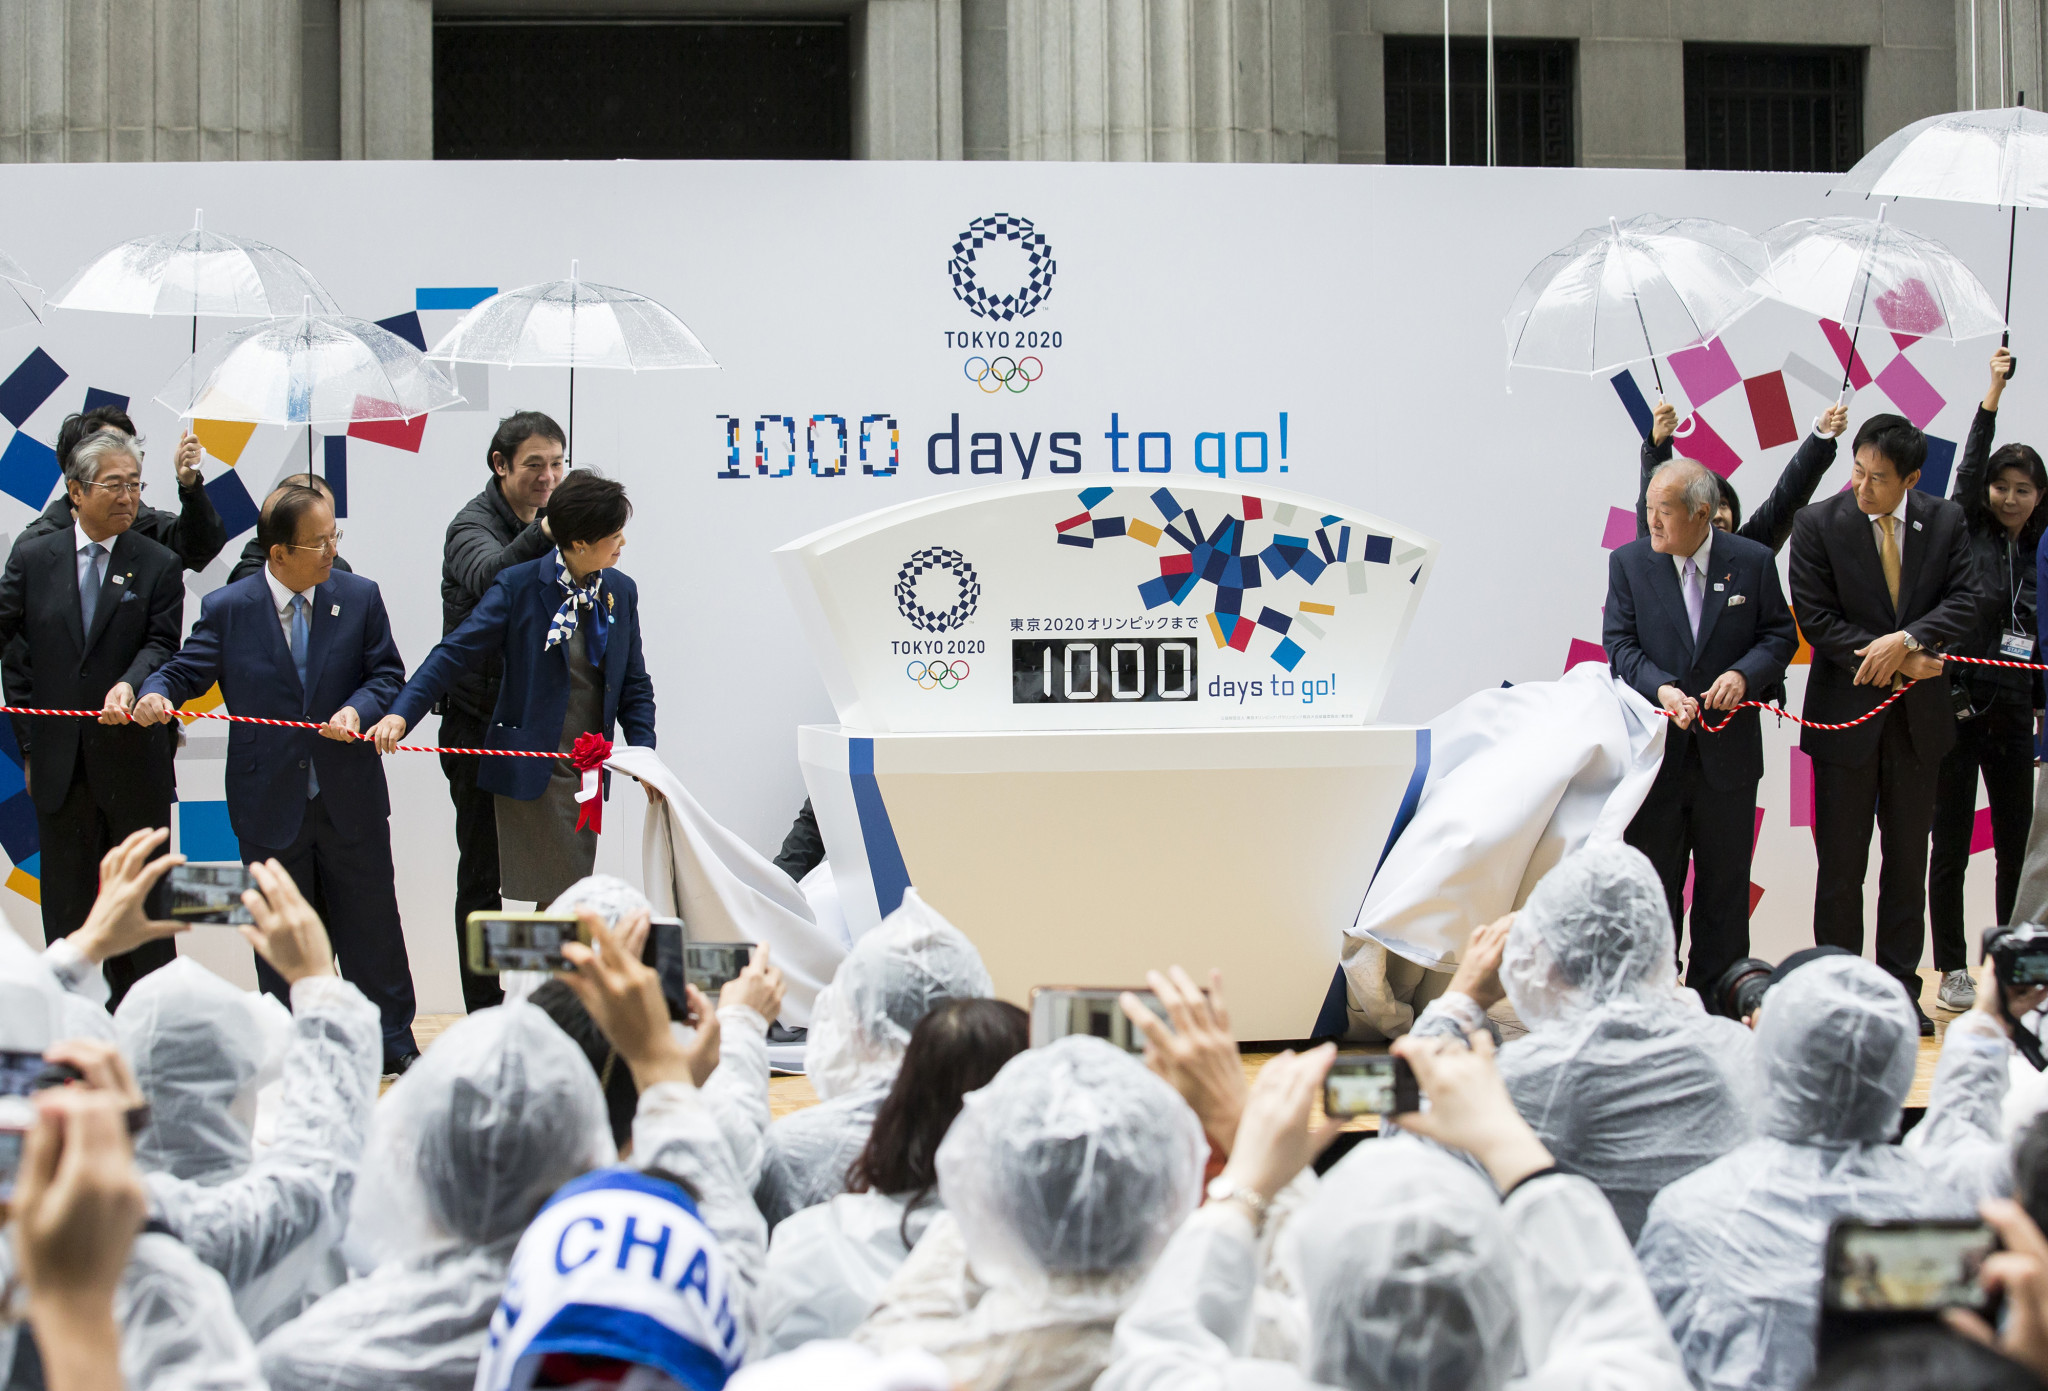 Tokyo 2020 marks 1,000 days until start of Olympic Games with launch of countdown clock 